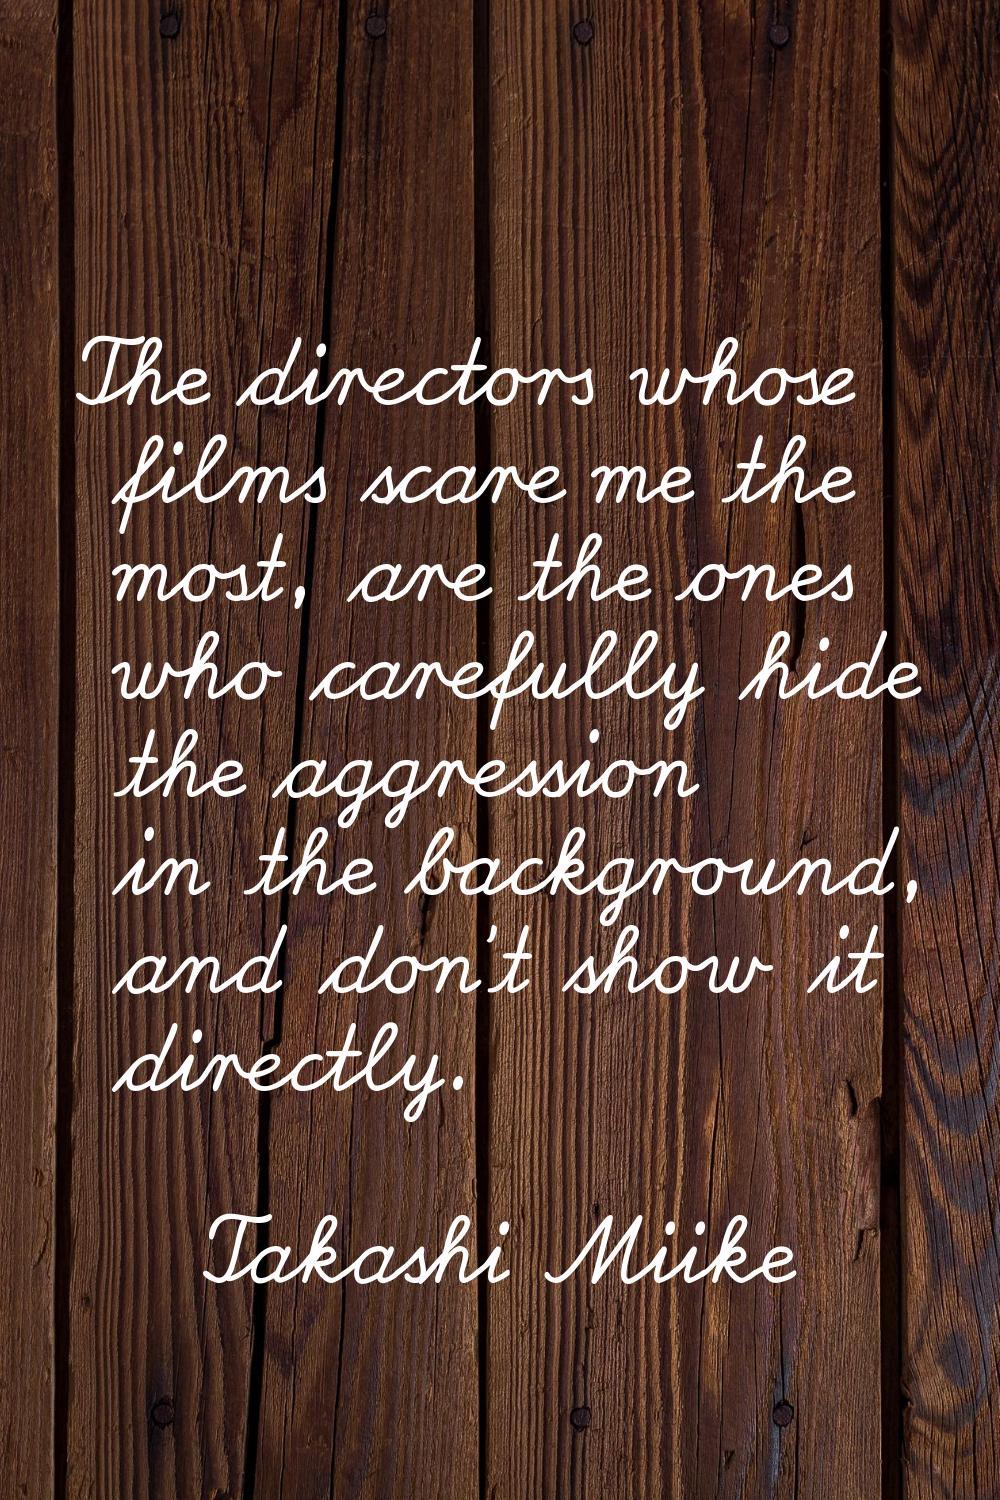 The directors whose films scare me the most, are the ones who carefully hide the aggression in the 